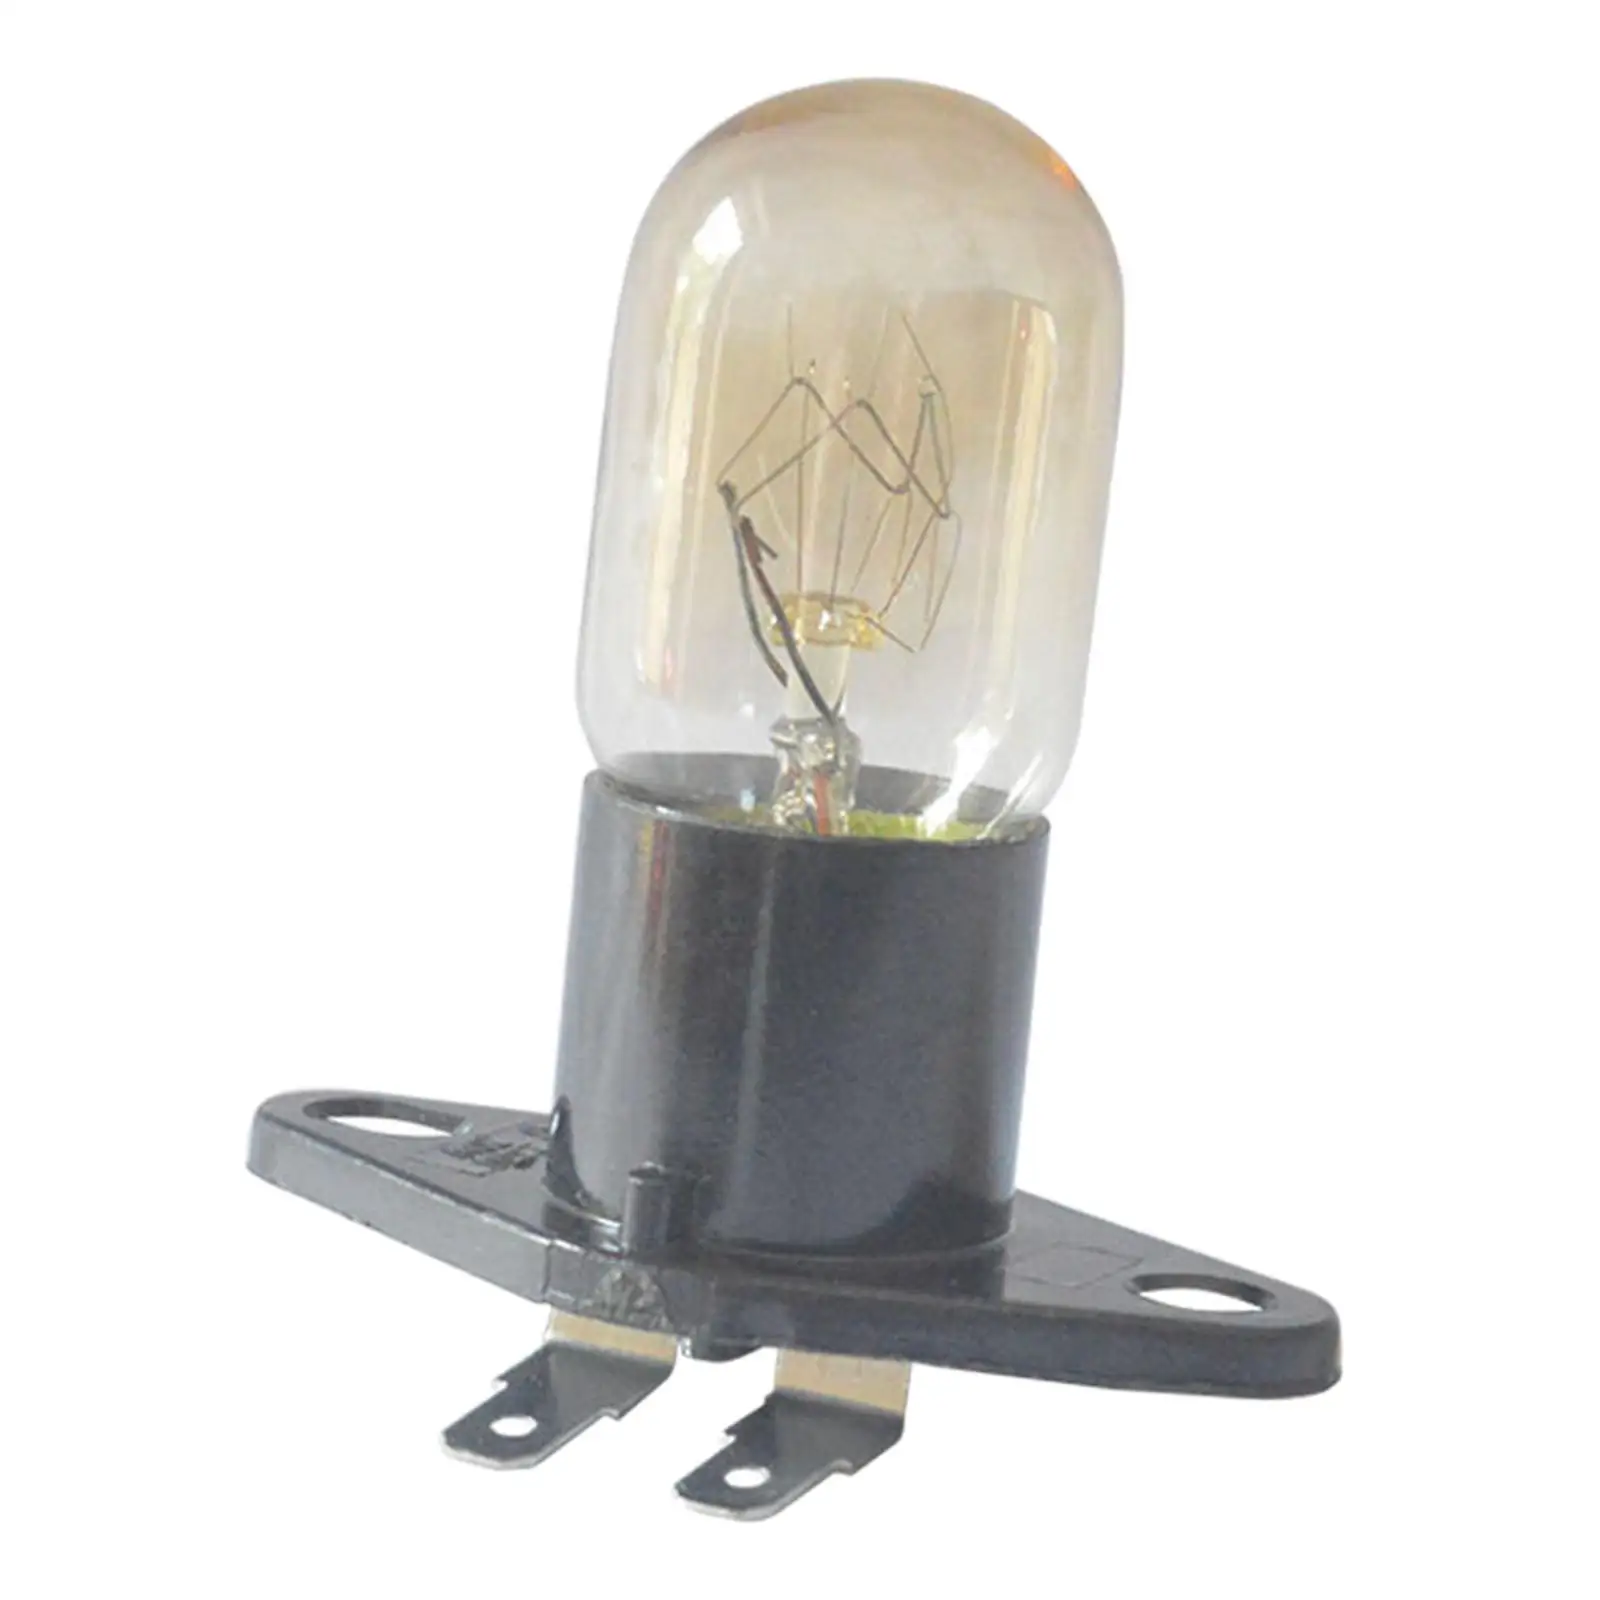 Universal Microwave Oven Light Lamp Bulb 250V 2A Bulb E14 Base Heat Resistant Bulb Microwave Bulb Microwave Oven Part